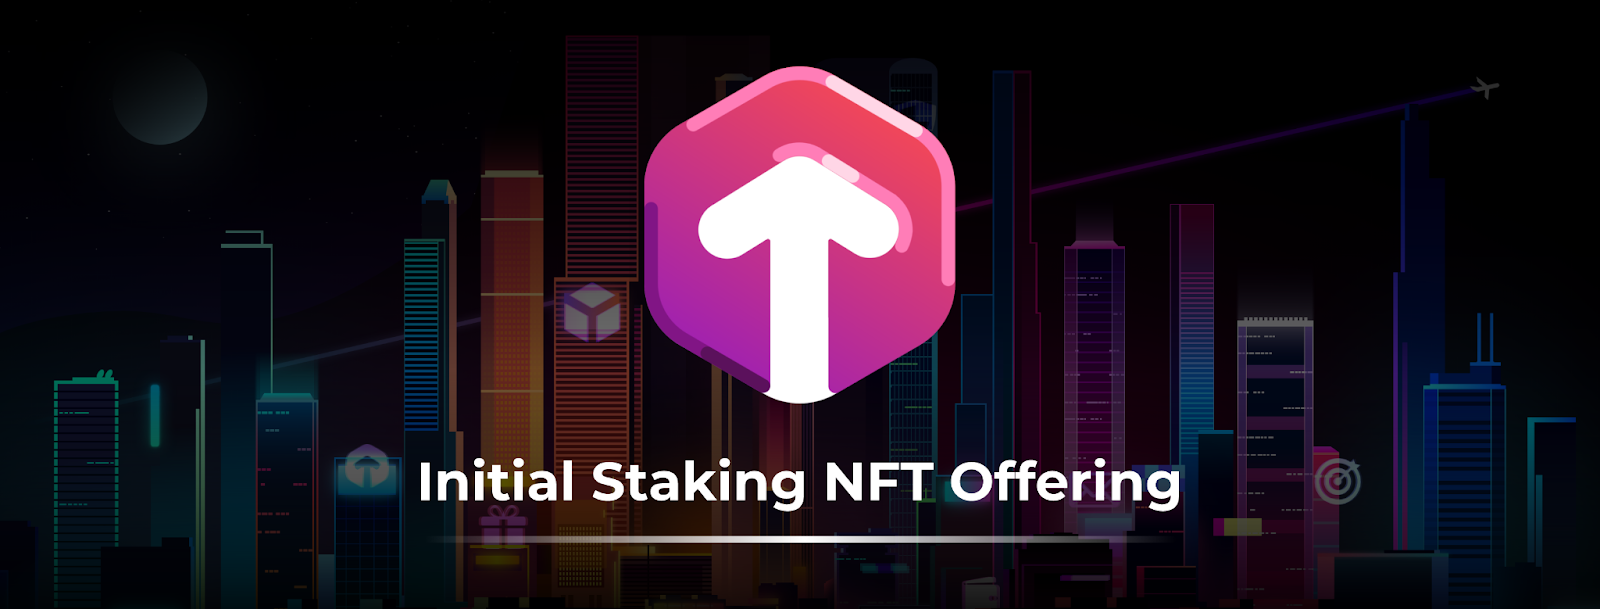 Introducing Initial Staking NFT Offering, ISNO and the first project that started it